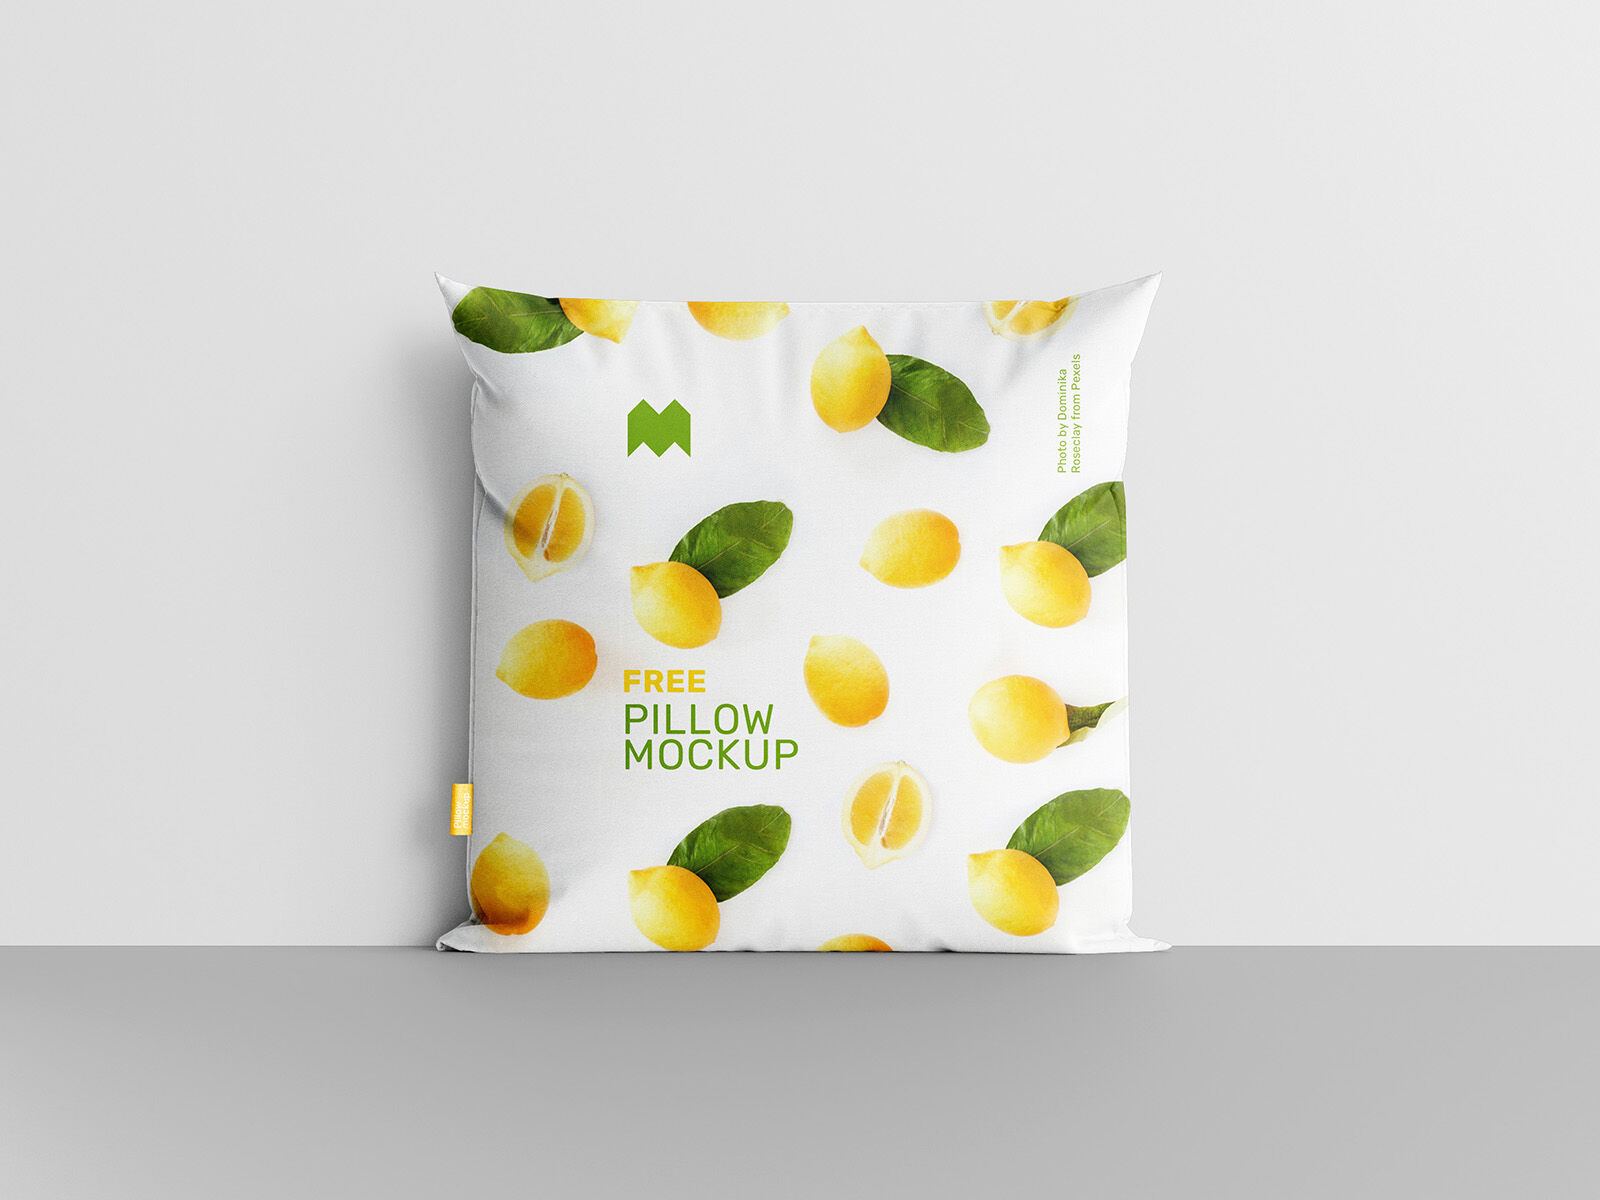 Pack of 4 Mockups of Square Pillow at Different Angeles FREE PSD